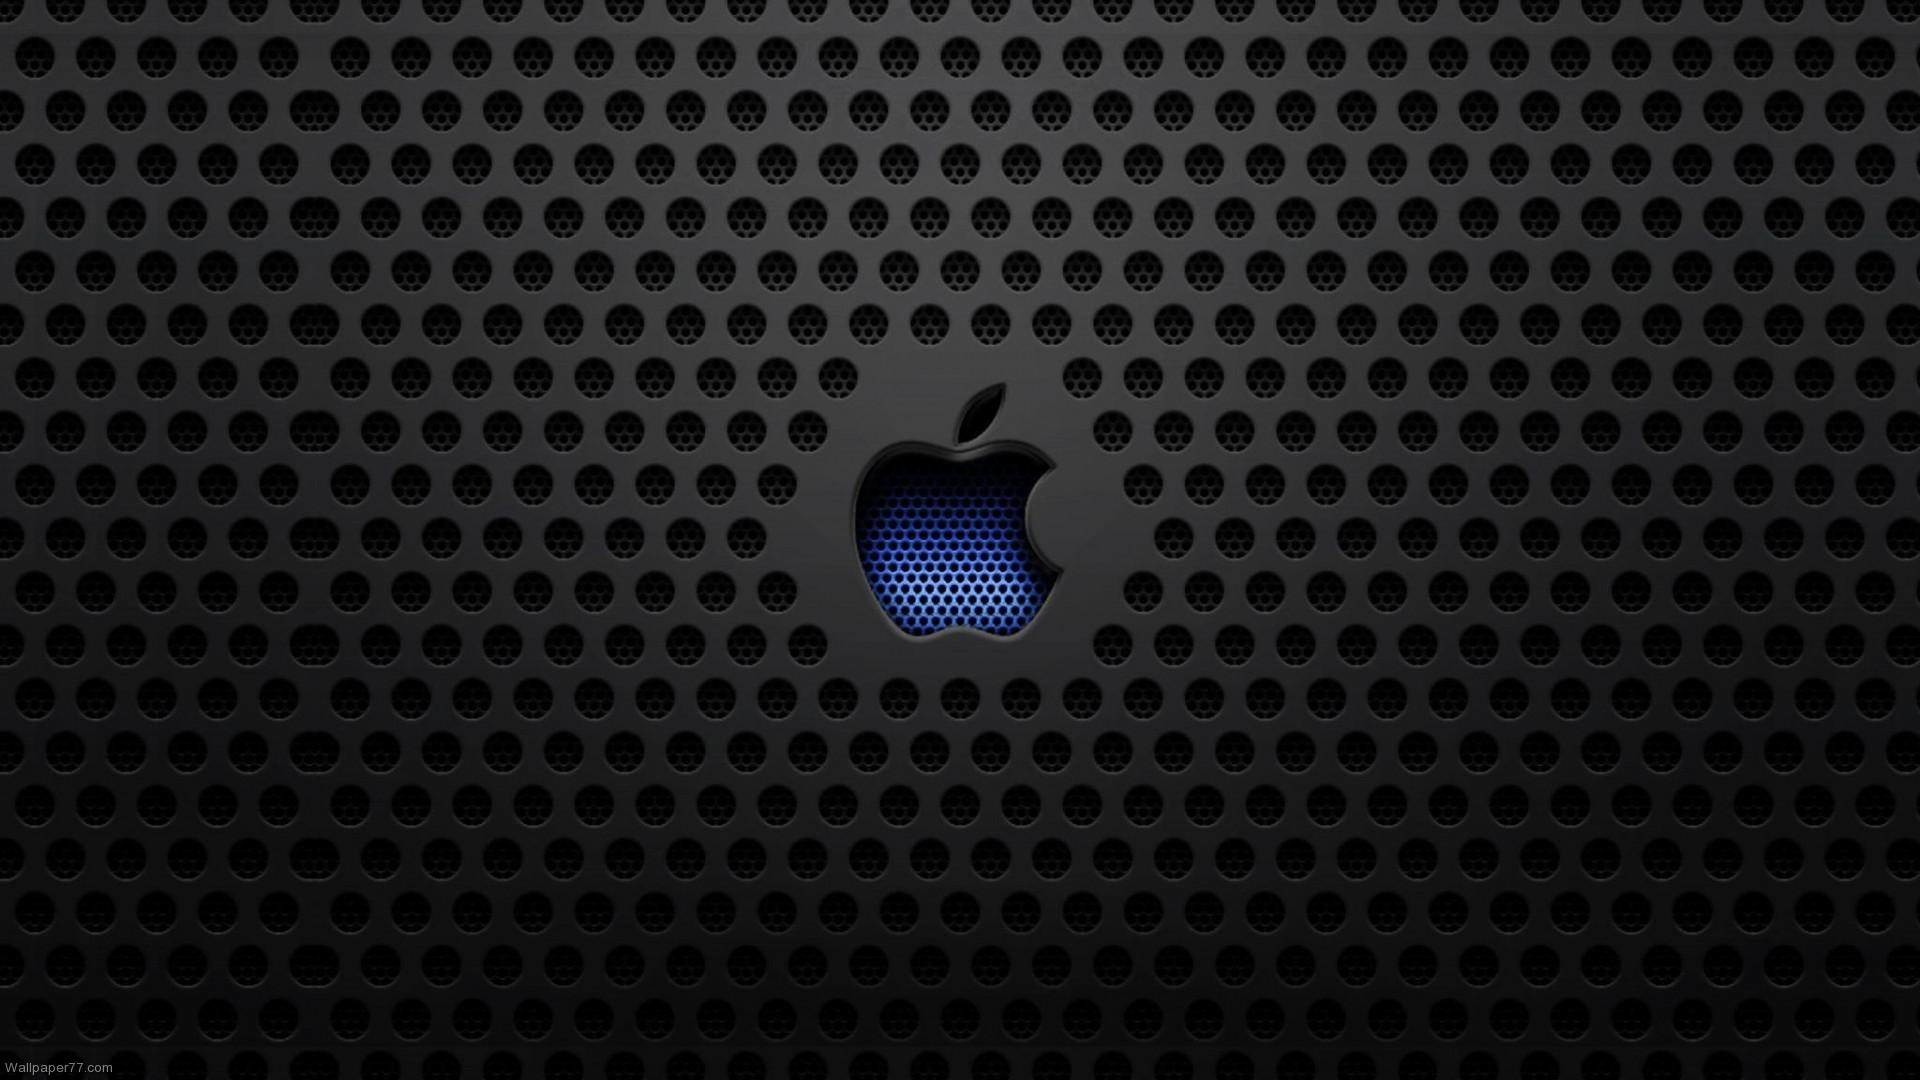 A list of 25 Amazing, Unique, Cool Free HD Apple Logo Wallpapers for all the Apple lovers out there who love their iPhones, iPods, Macbooks and Apple